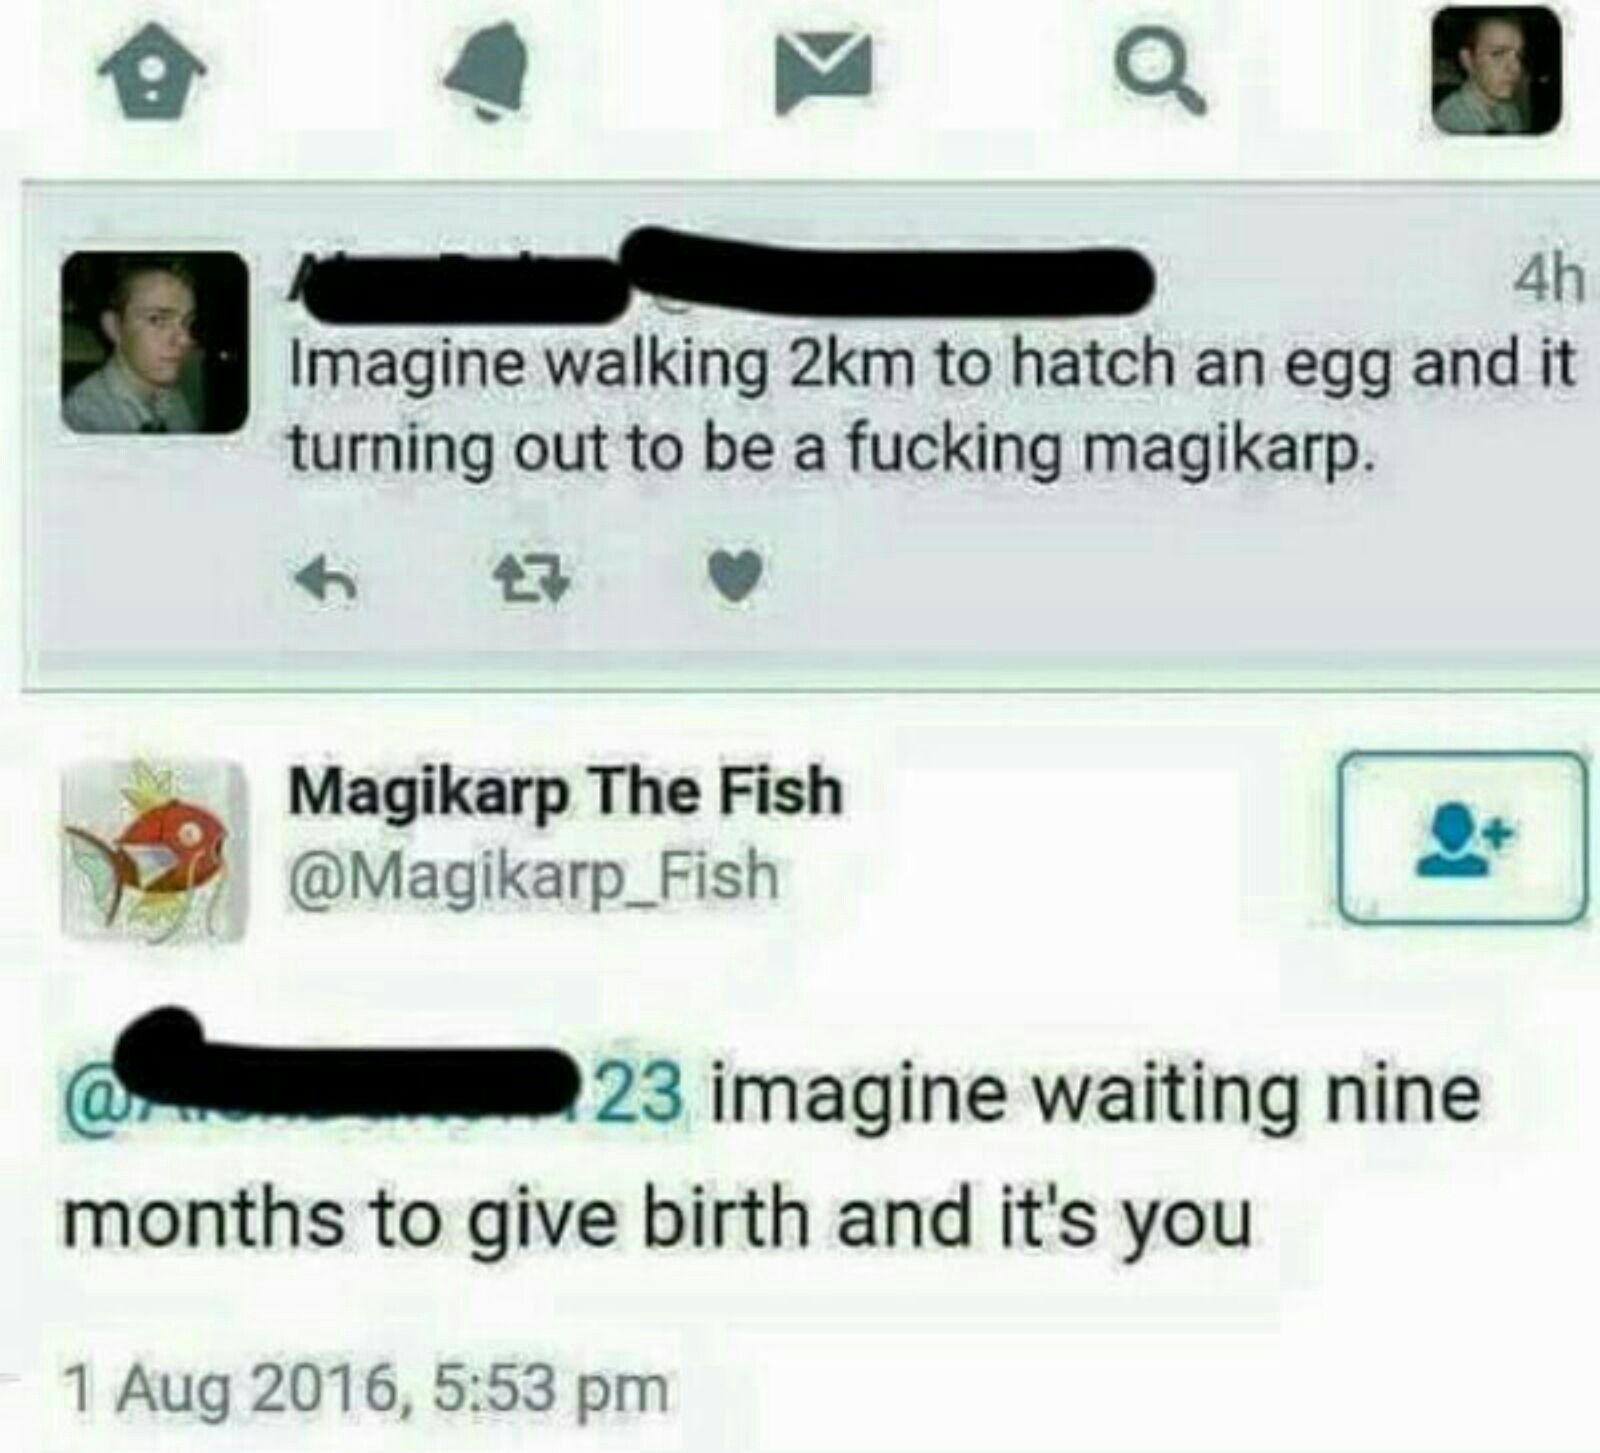 4h
Imagine walking 2km to hatch an egg and it
turning out to be a fucking magikarp.
Magikarp The Fish
@Magikarp_Fish
23 imagine waiting nine
months to give birth and it's you
1 Aug 2016, 5:53 pm